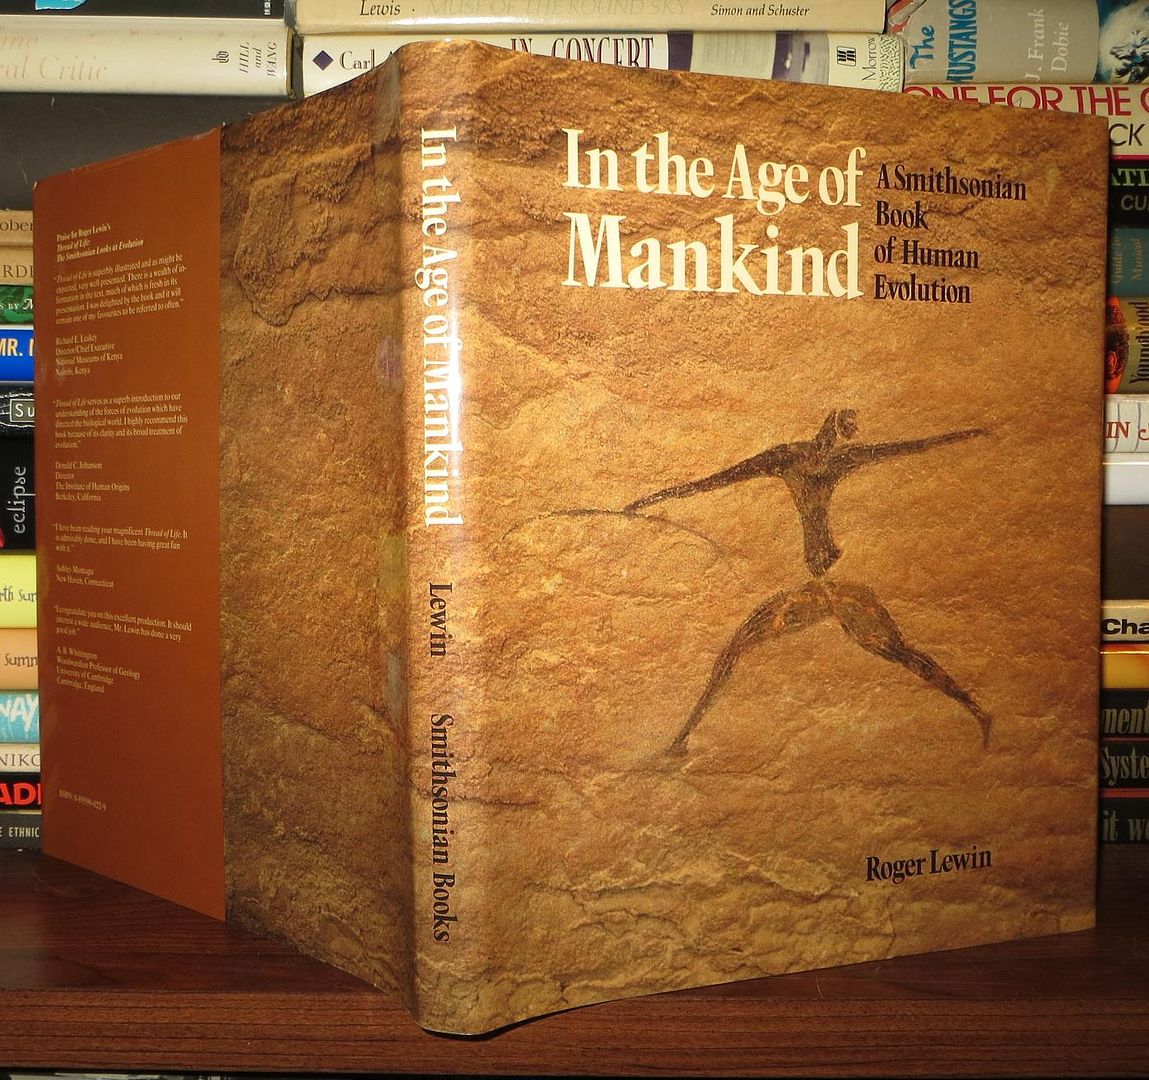 LEWIN, ROGER - In the Age of Mankind a Smithsonian Book of Human Evolution